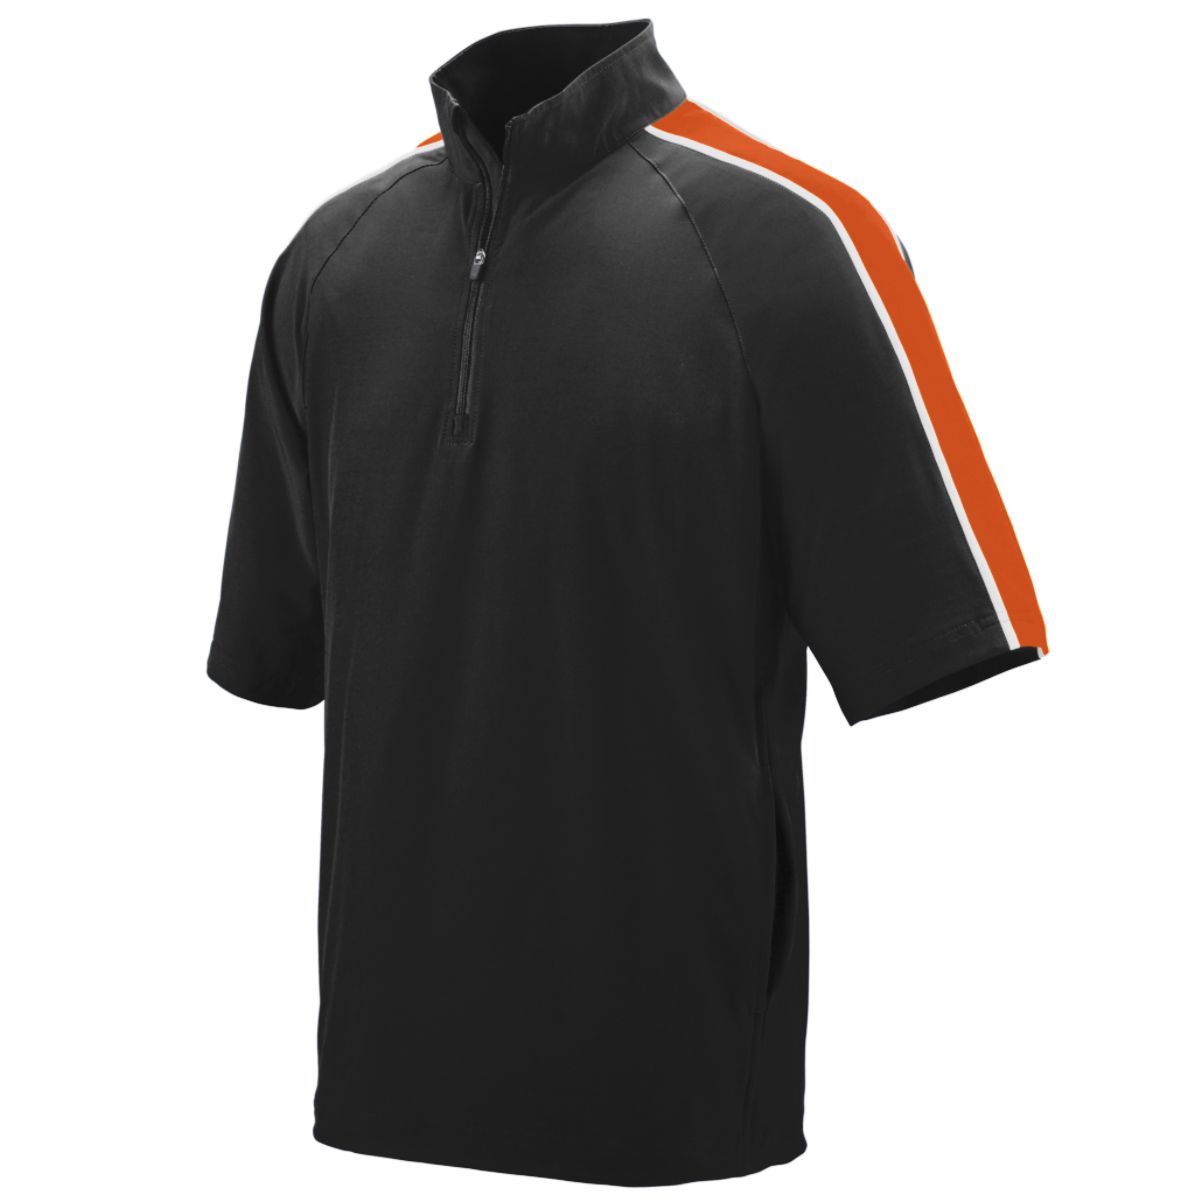 Augusta Sportswear Quantum Short Sleeve Pullover in Black/Orange/White  -Part of the Adult, Adult-Jacket, Augusta-Products, Outerwear product lines at KanaleyCreations.com